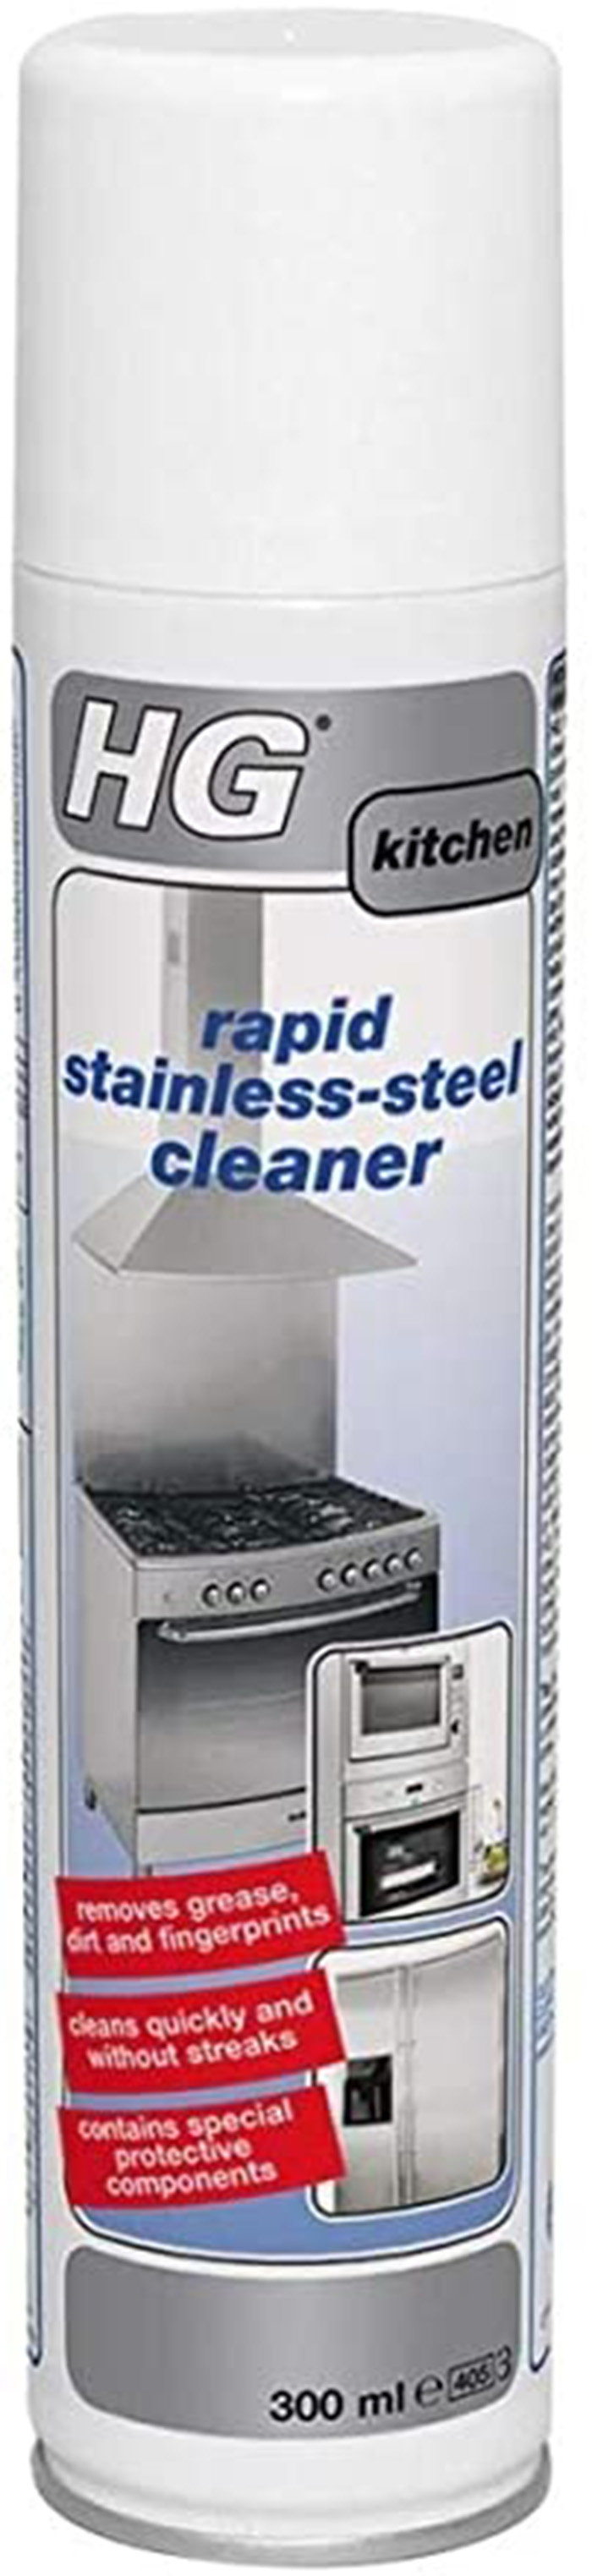 HG RAPID STAINLESS STEEL CLEANER 300ML